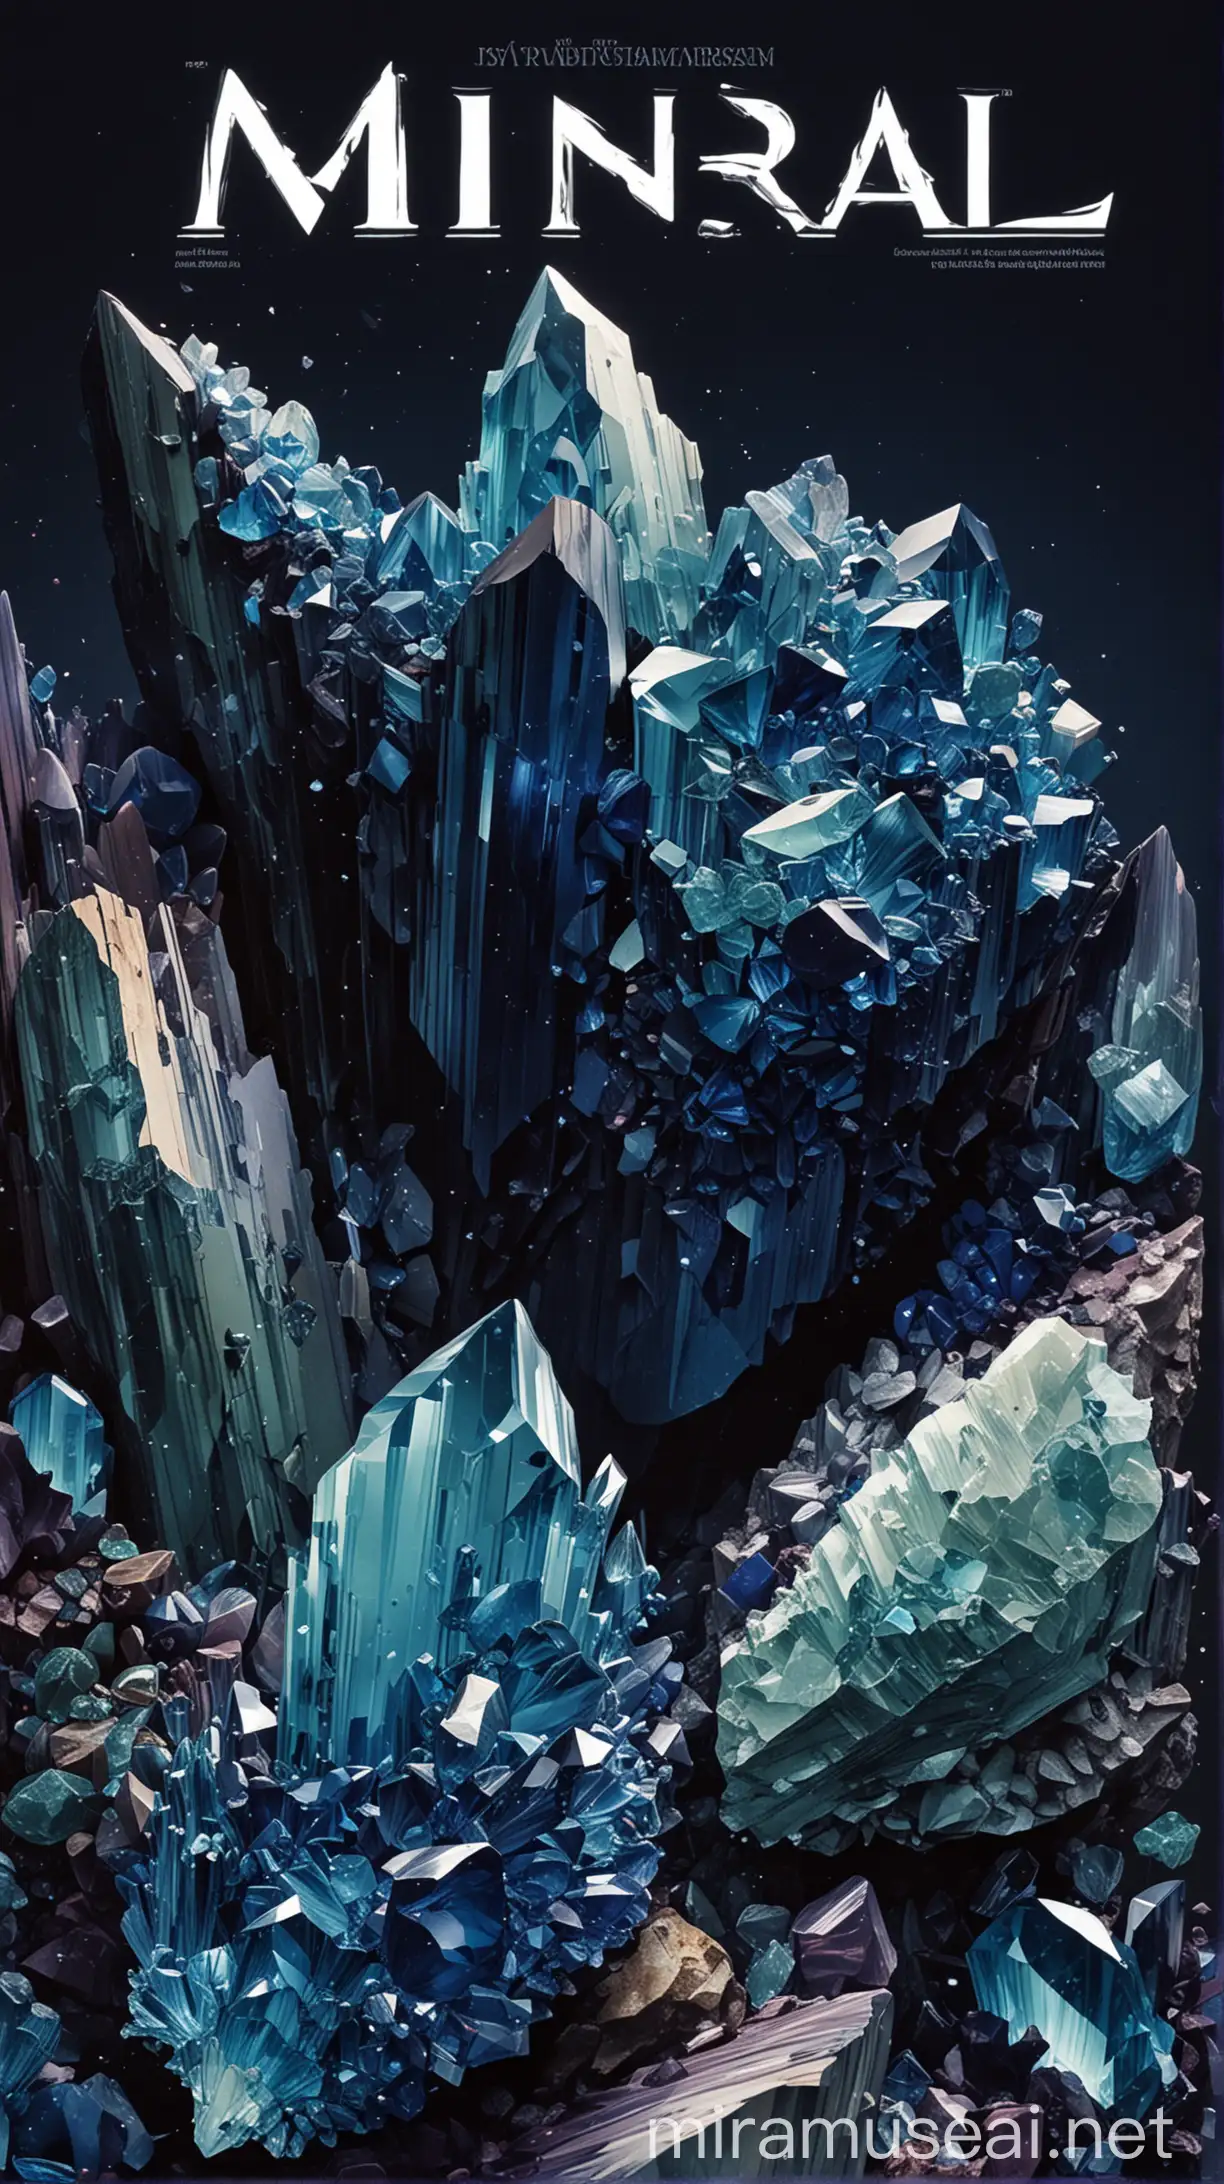 Regarding the cover, title, introduction of Mineral Magazine, the main color is dark blue, with various colored crystals, minerals, and fluorites, forming a beautiful and simple popular science type magazine cover.